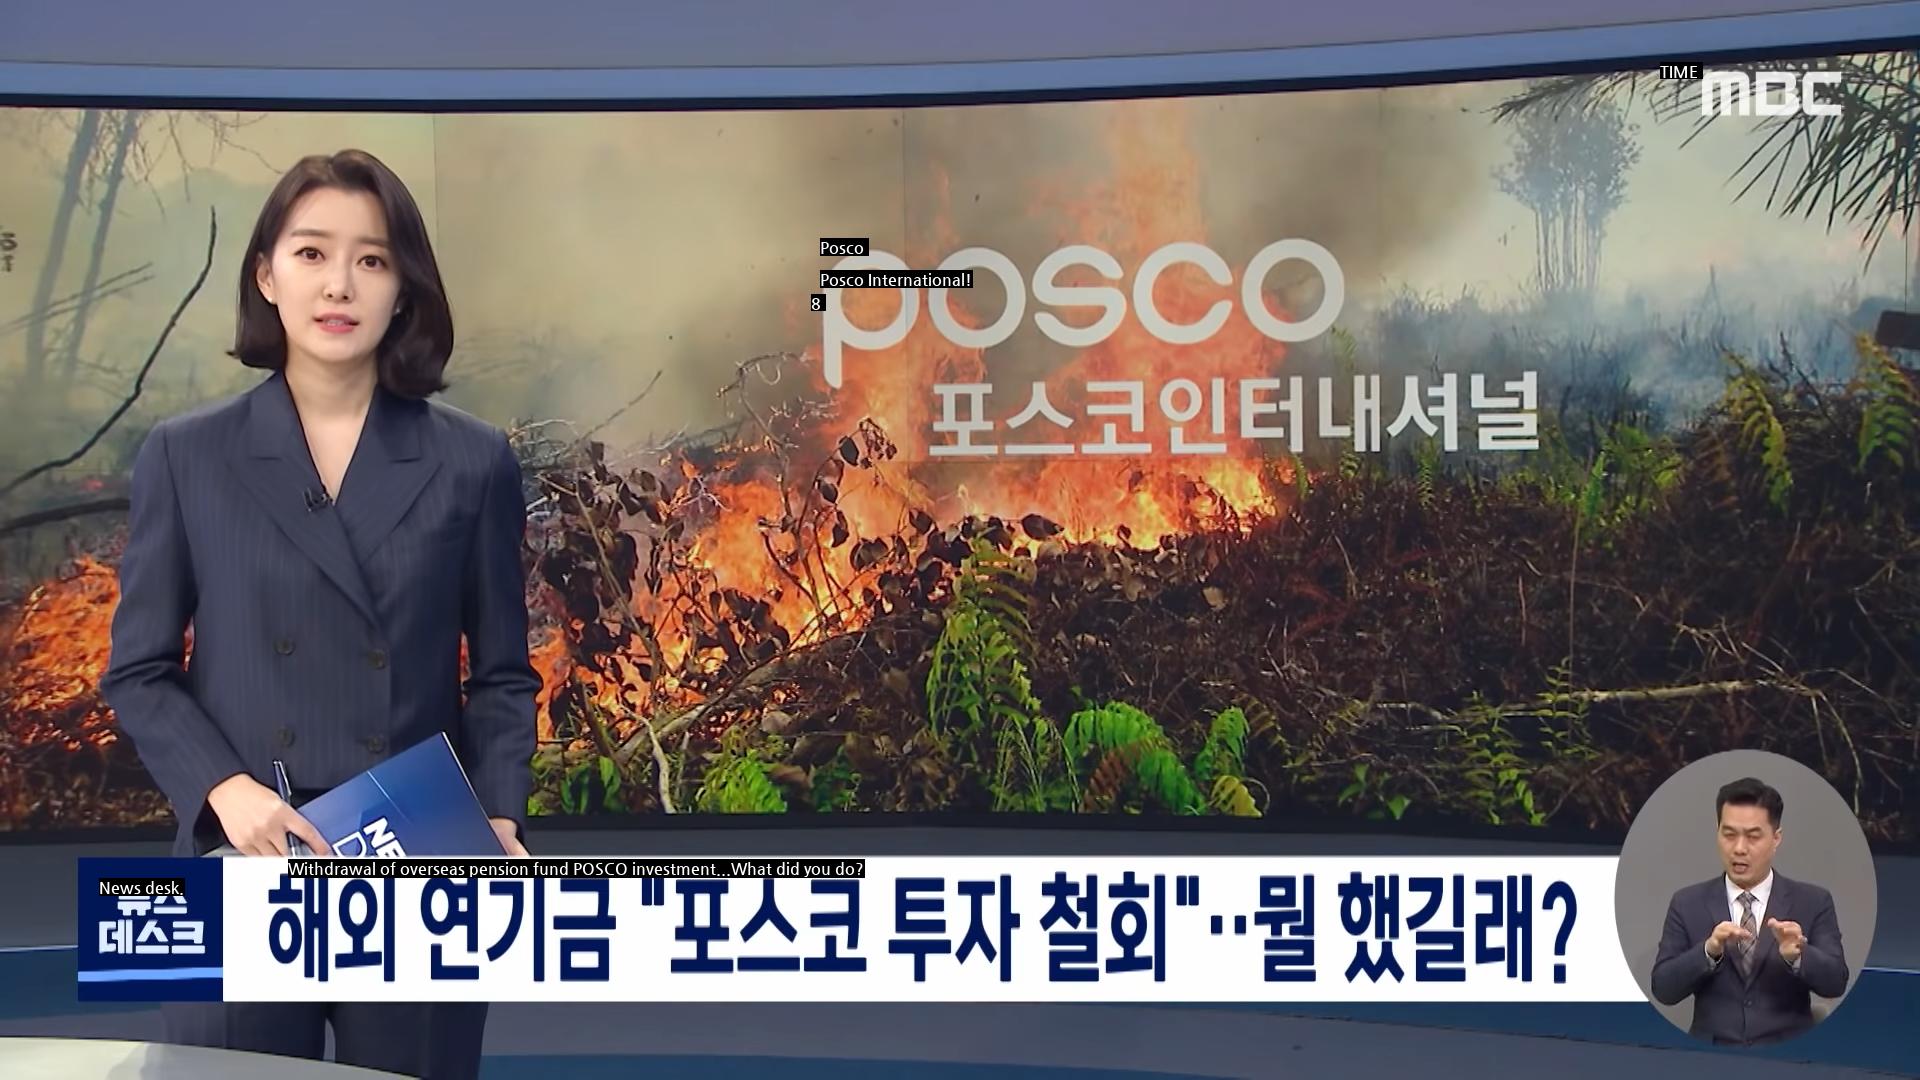 POSCO... Even if we do this in Korea, someone didn't say anything.